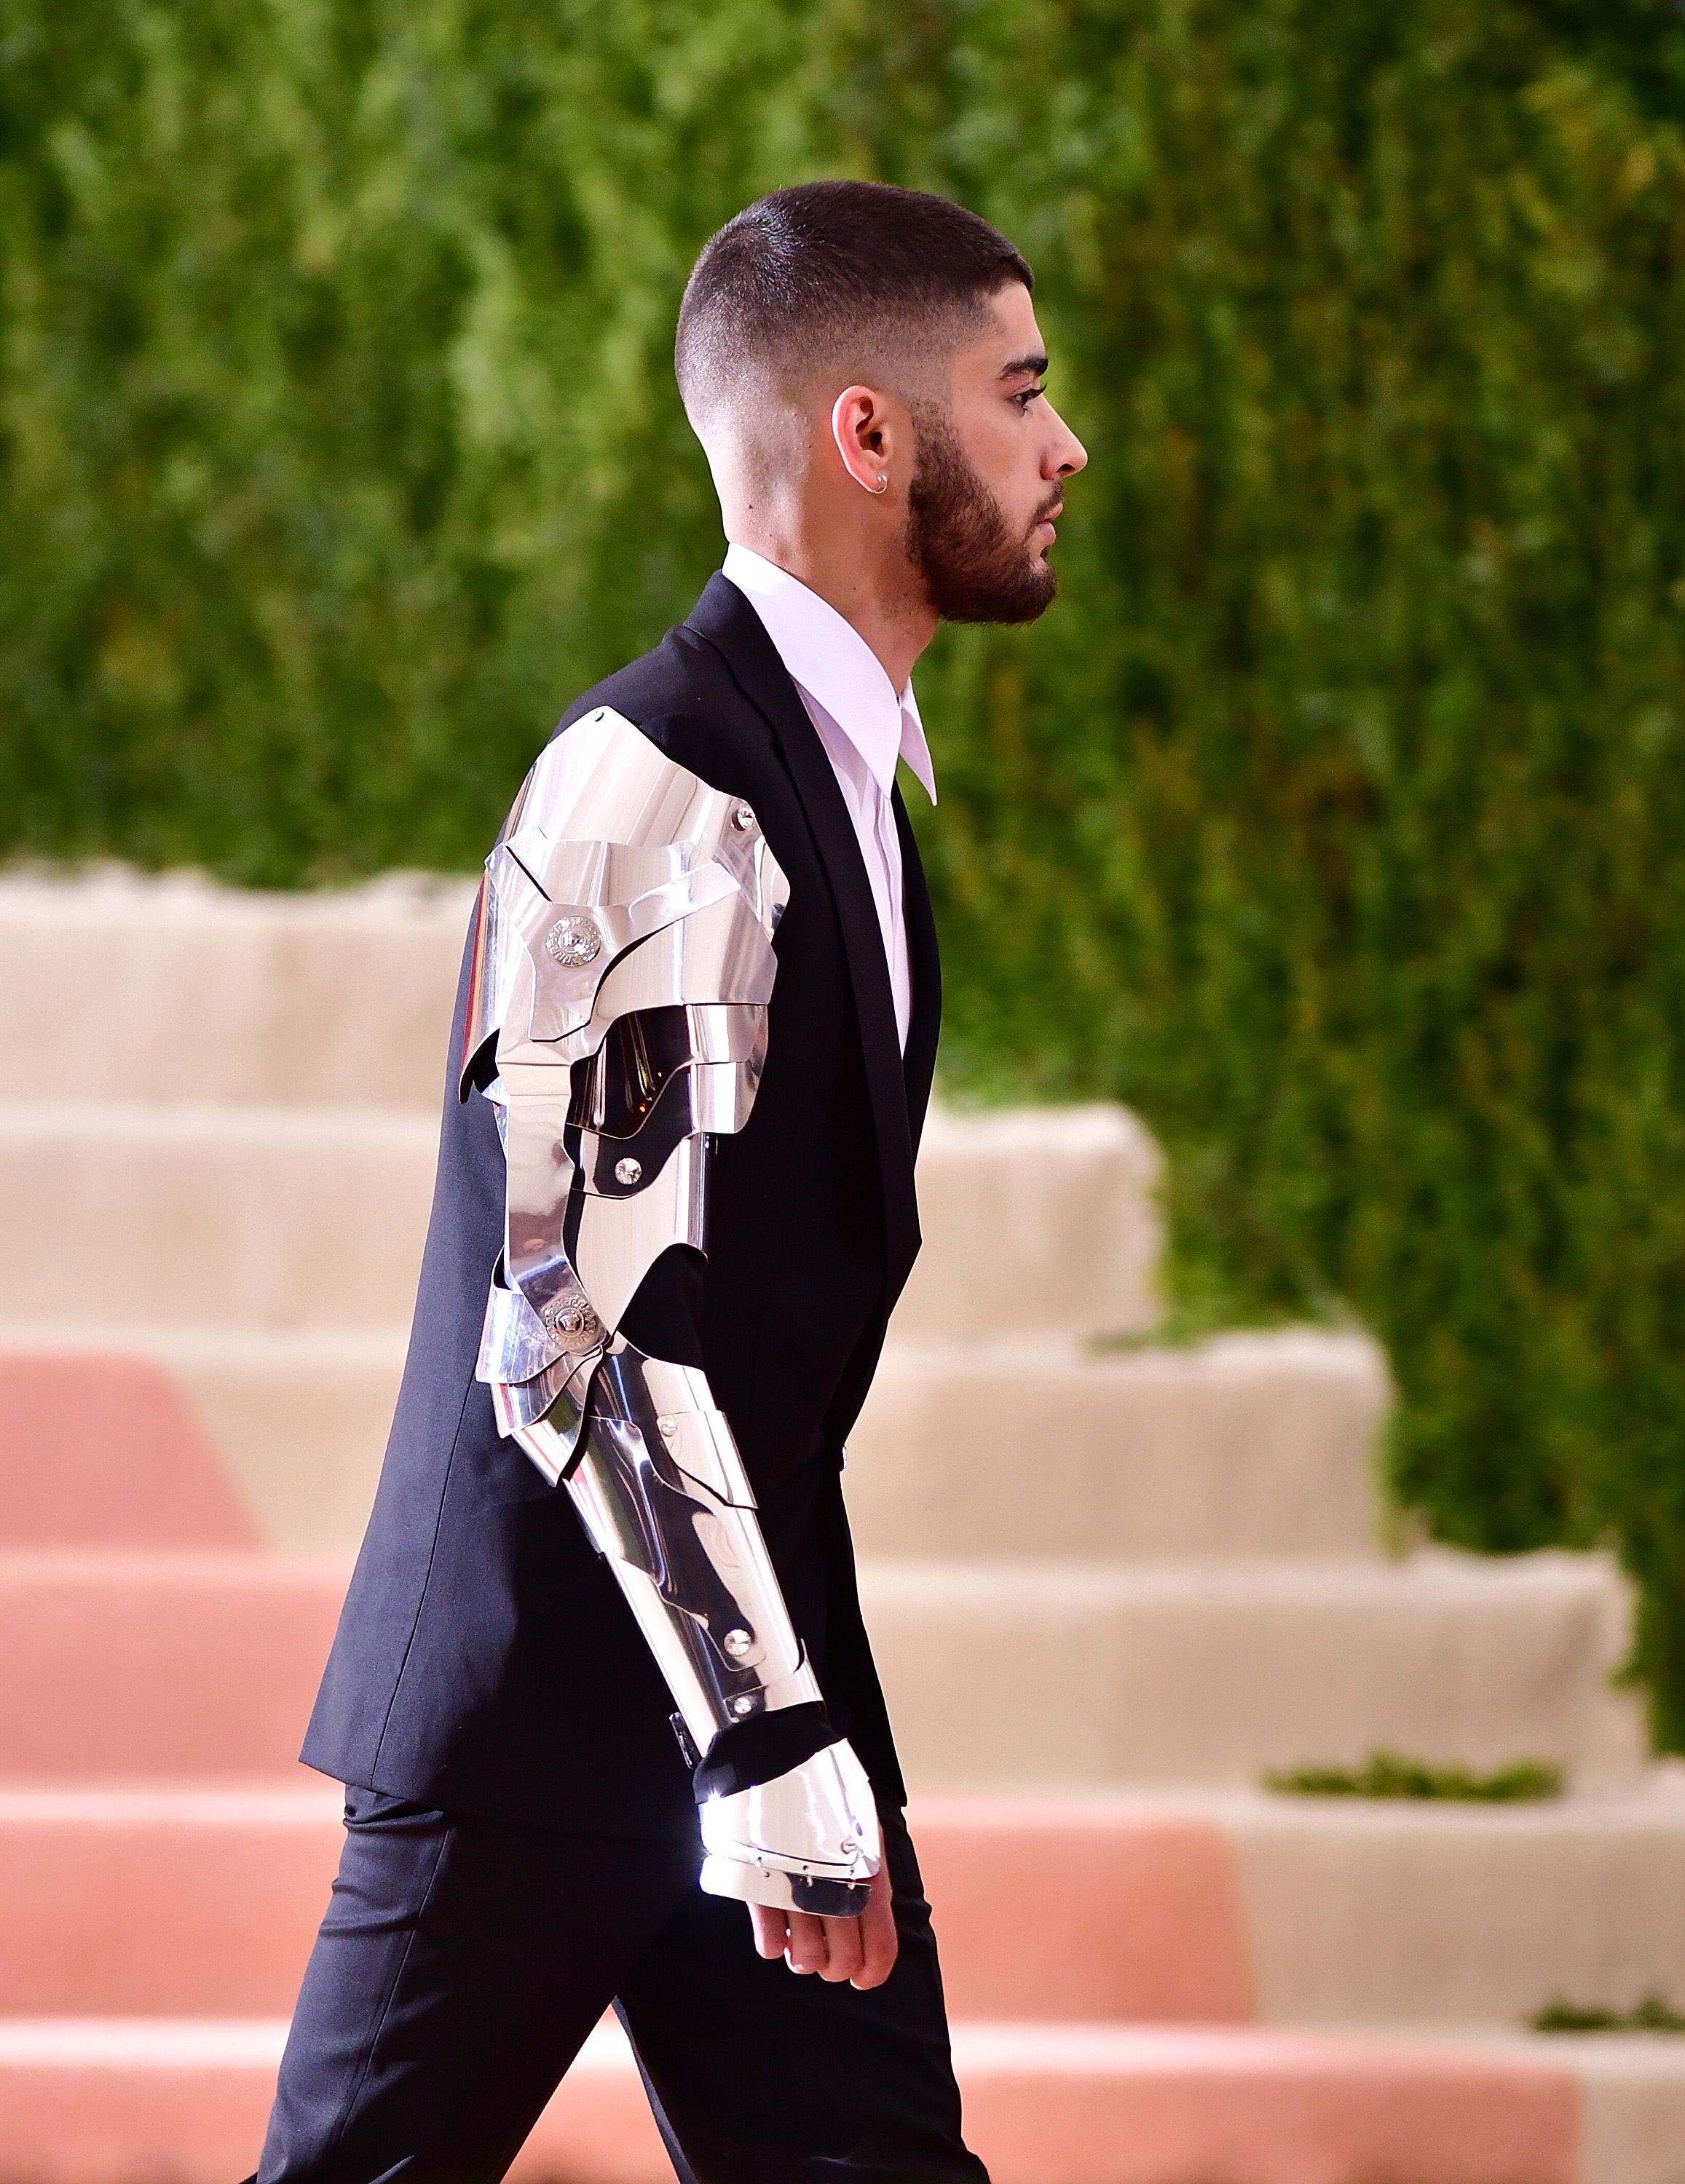 Zayn Malik at the Met Gala red carpet in 2016 | Source: Getty Images